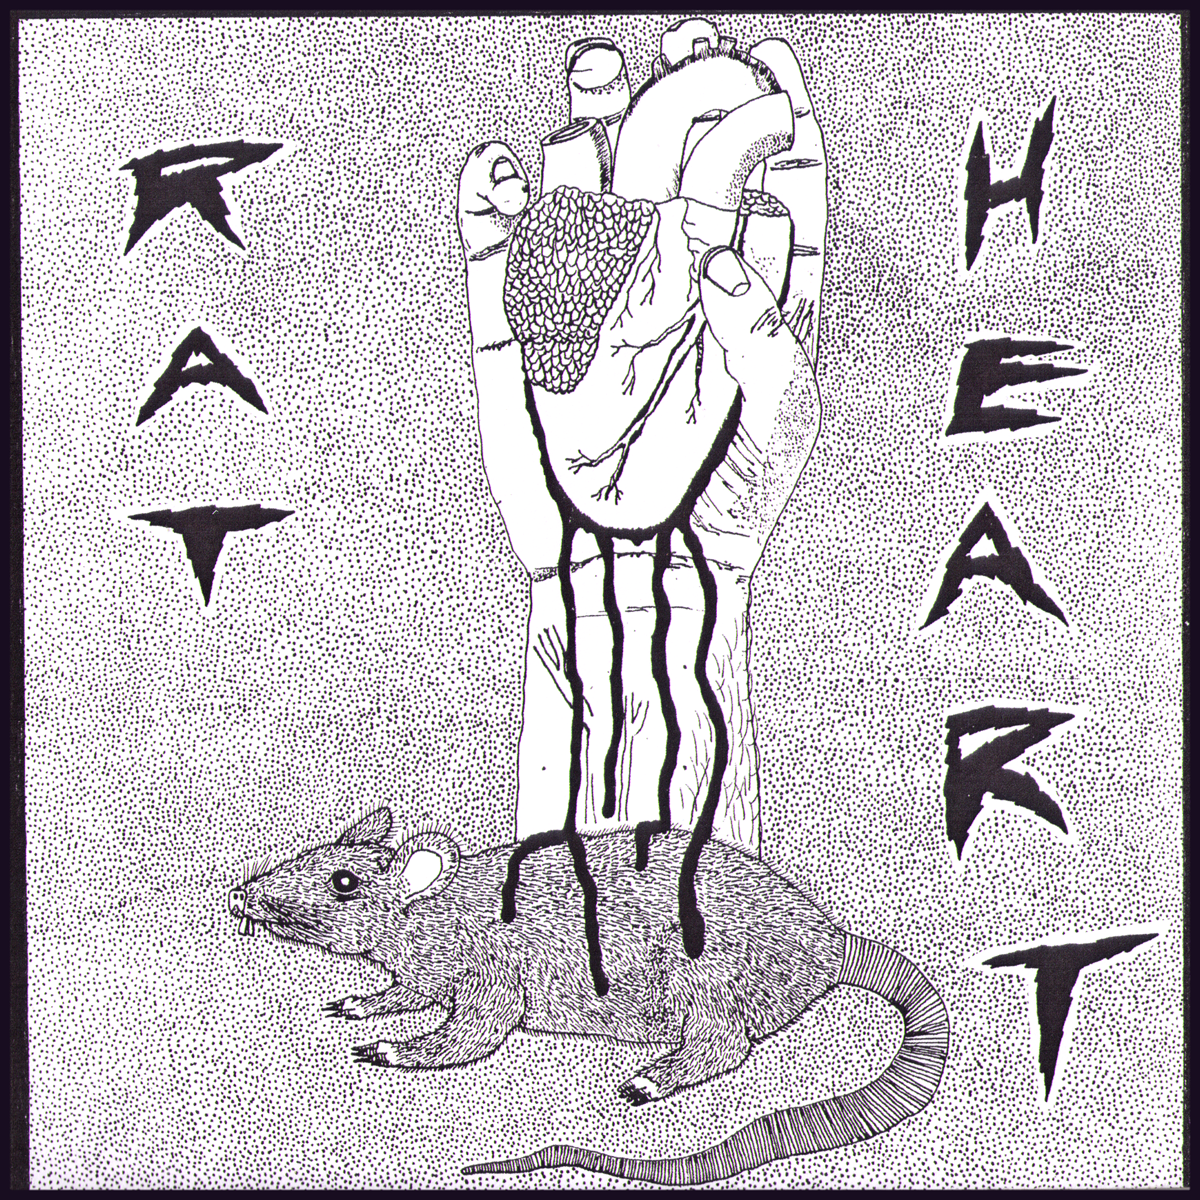 Rat Heart- S/T 7” ~RARE W/ MARTIN OF LUMPY AND THE DUMPERS!